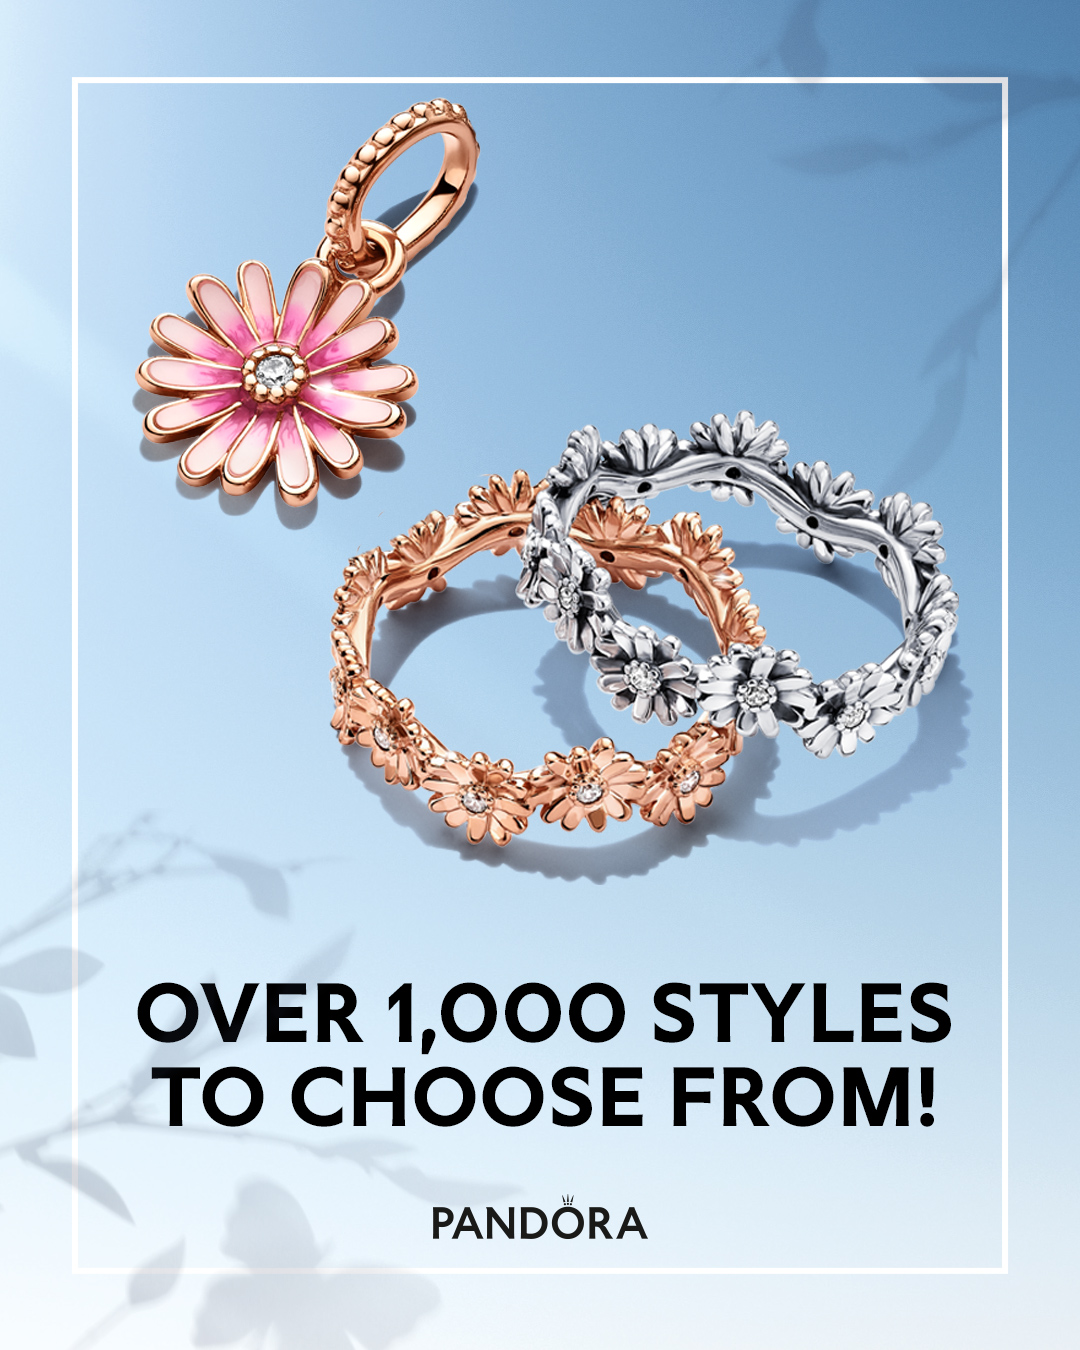 Pandora floral rings and charm